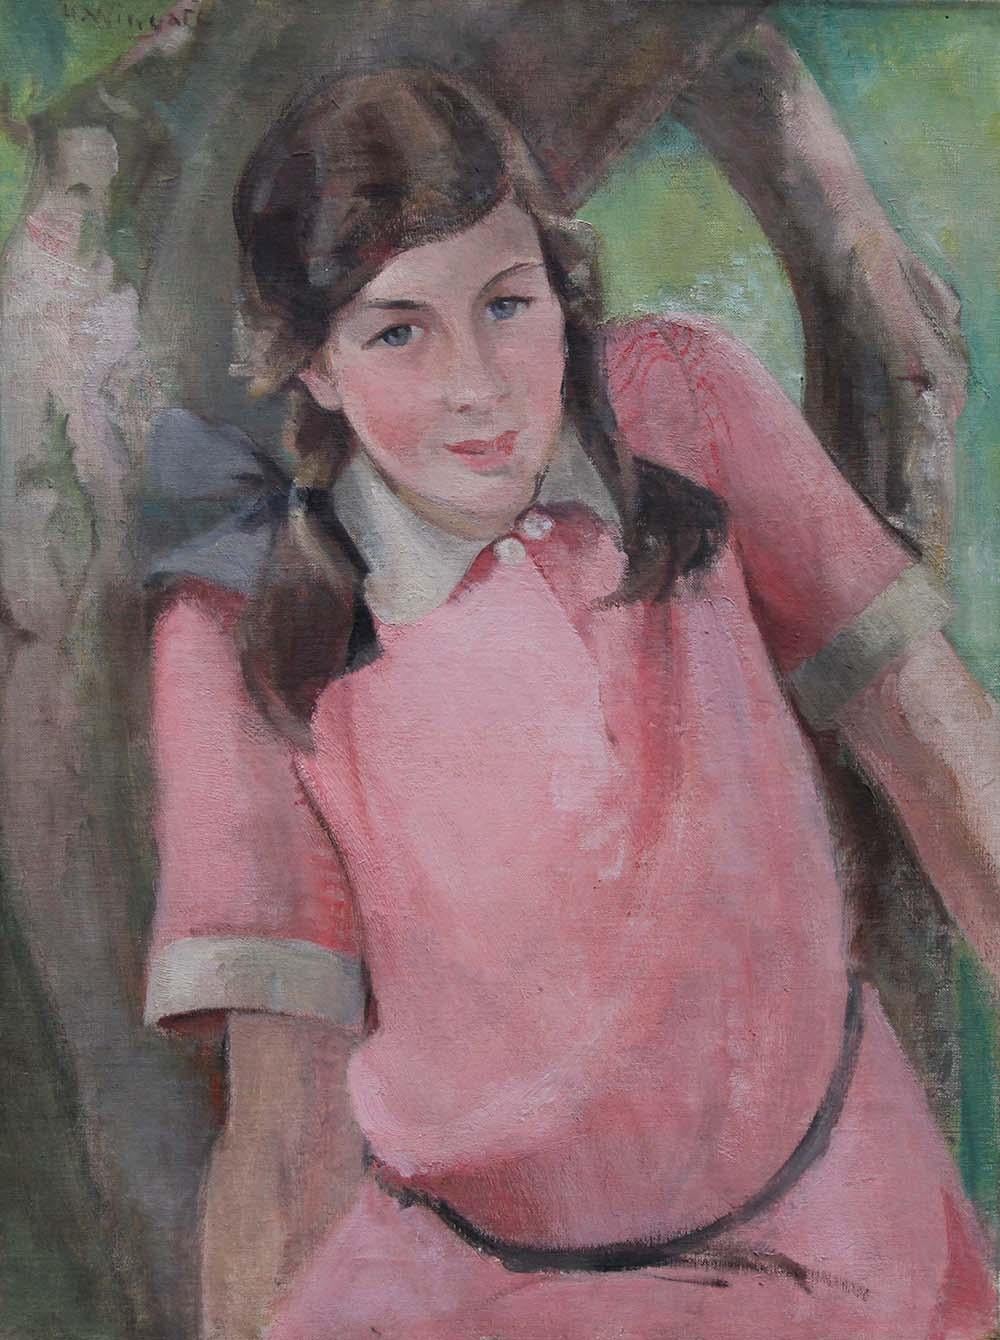 This lovely Scottish Colourist portrait oil painting is by noted Scottish female artist Helen Ainslie Wingate. She was the daughter of Sir Charles Lawton Wingate who was president of the Royal Scottish Academy in 1919. It was exhibited at the